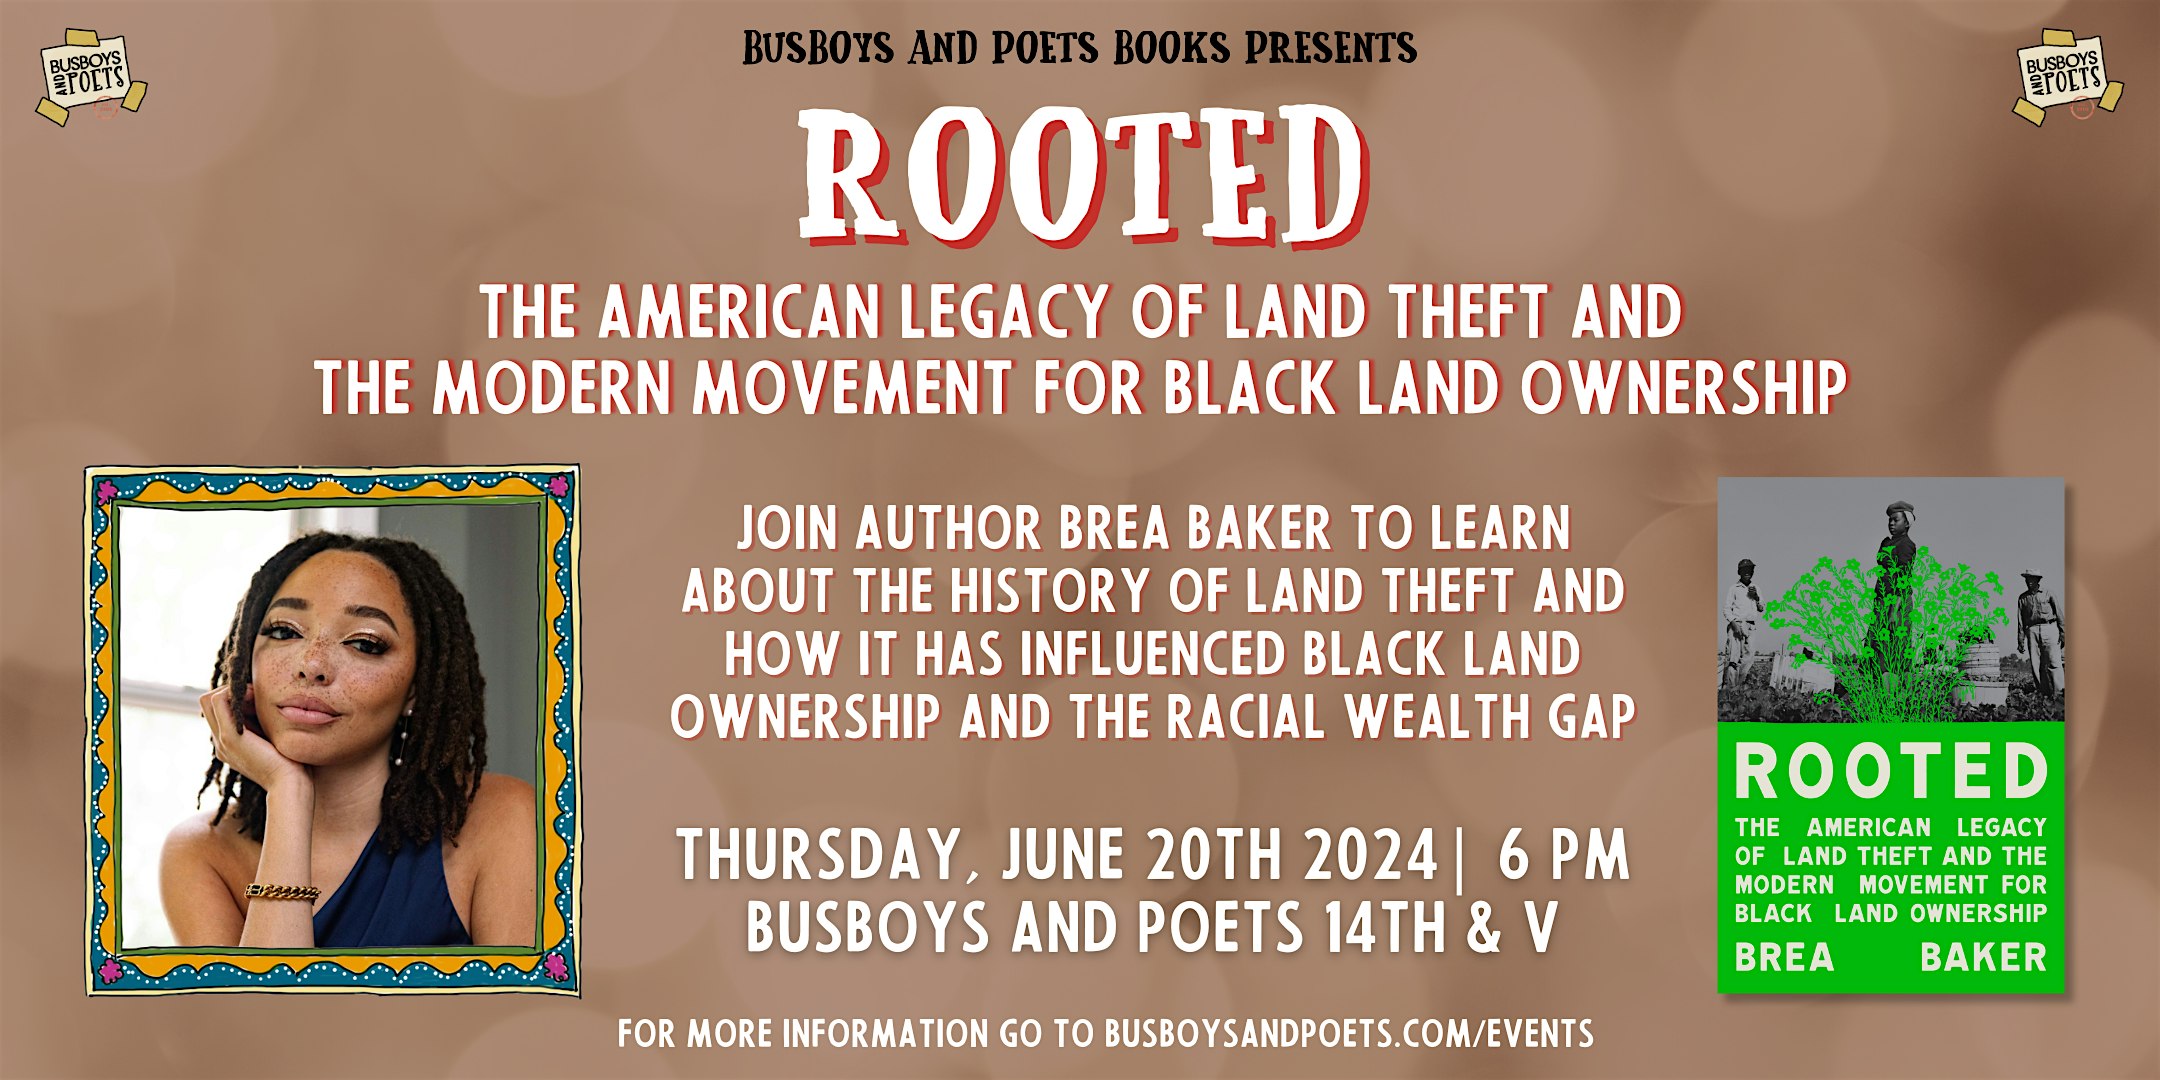 ROOTED | A Busboys and Poets Books Presentation